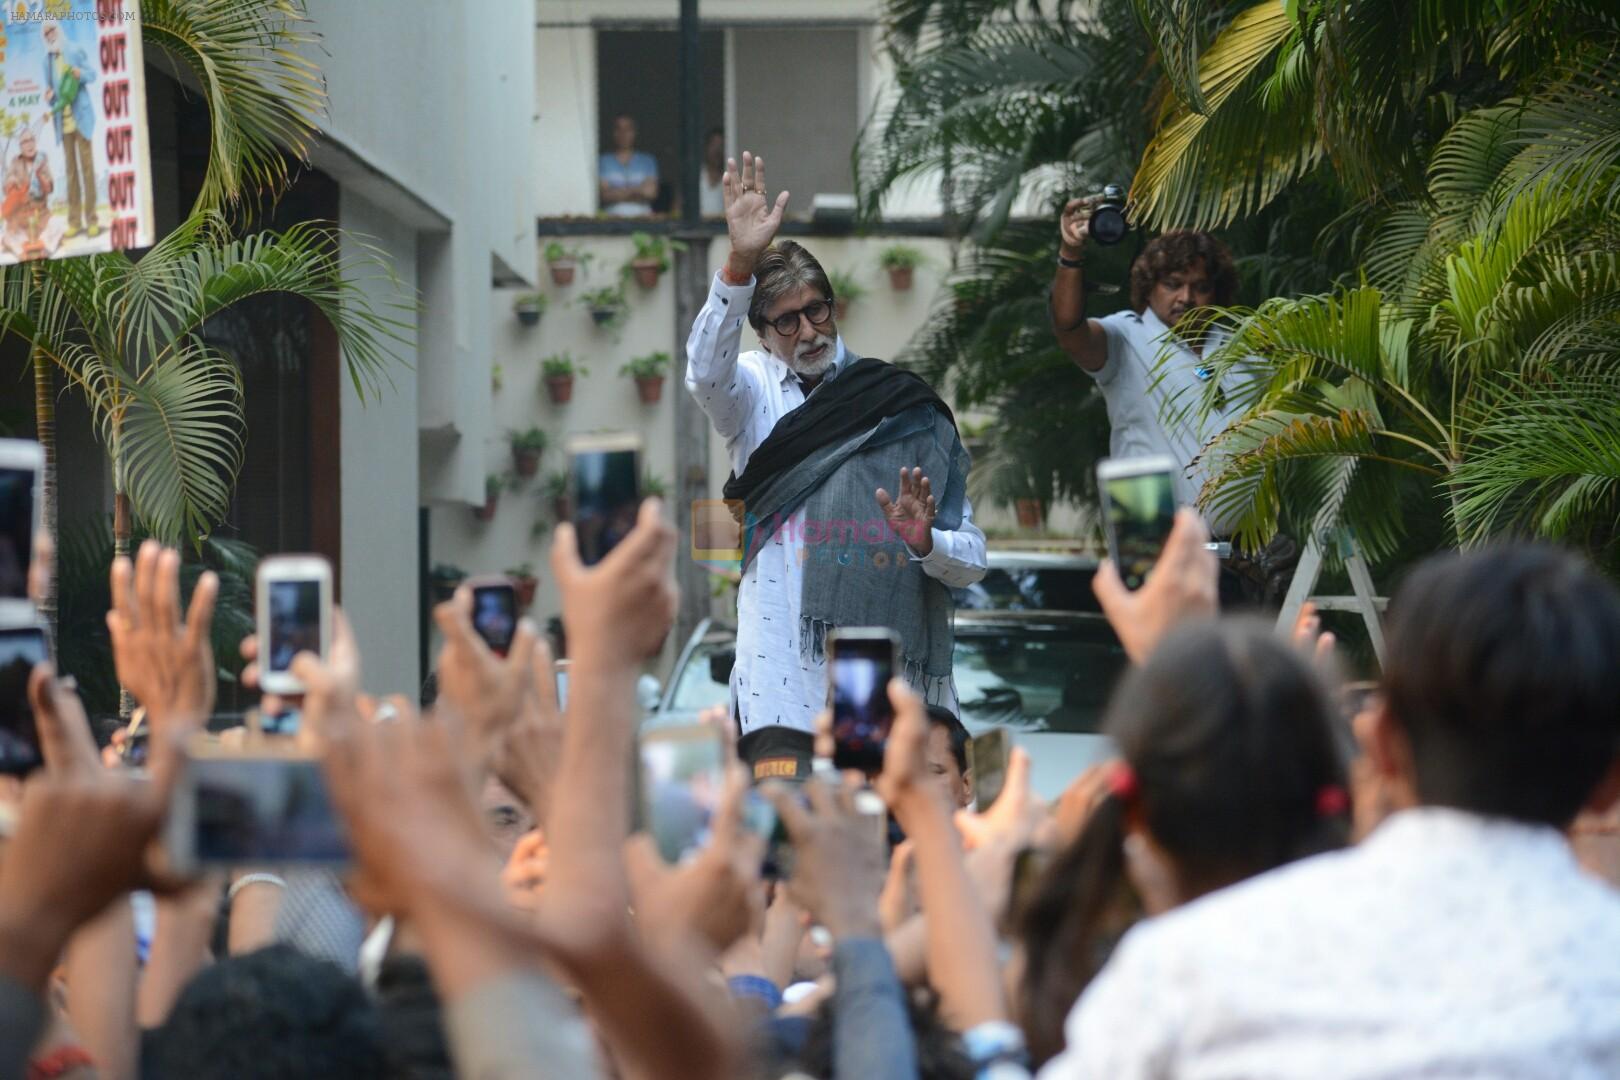 Amitabh Bachchan meets his fans at his Jalsa residence on 25th March 2018